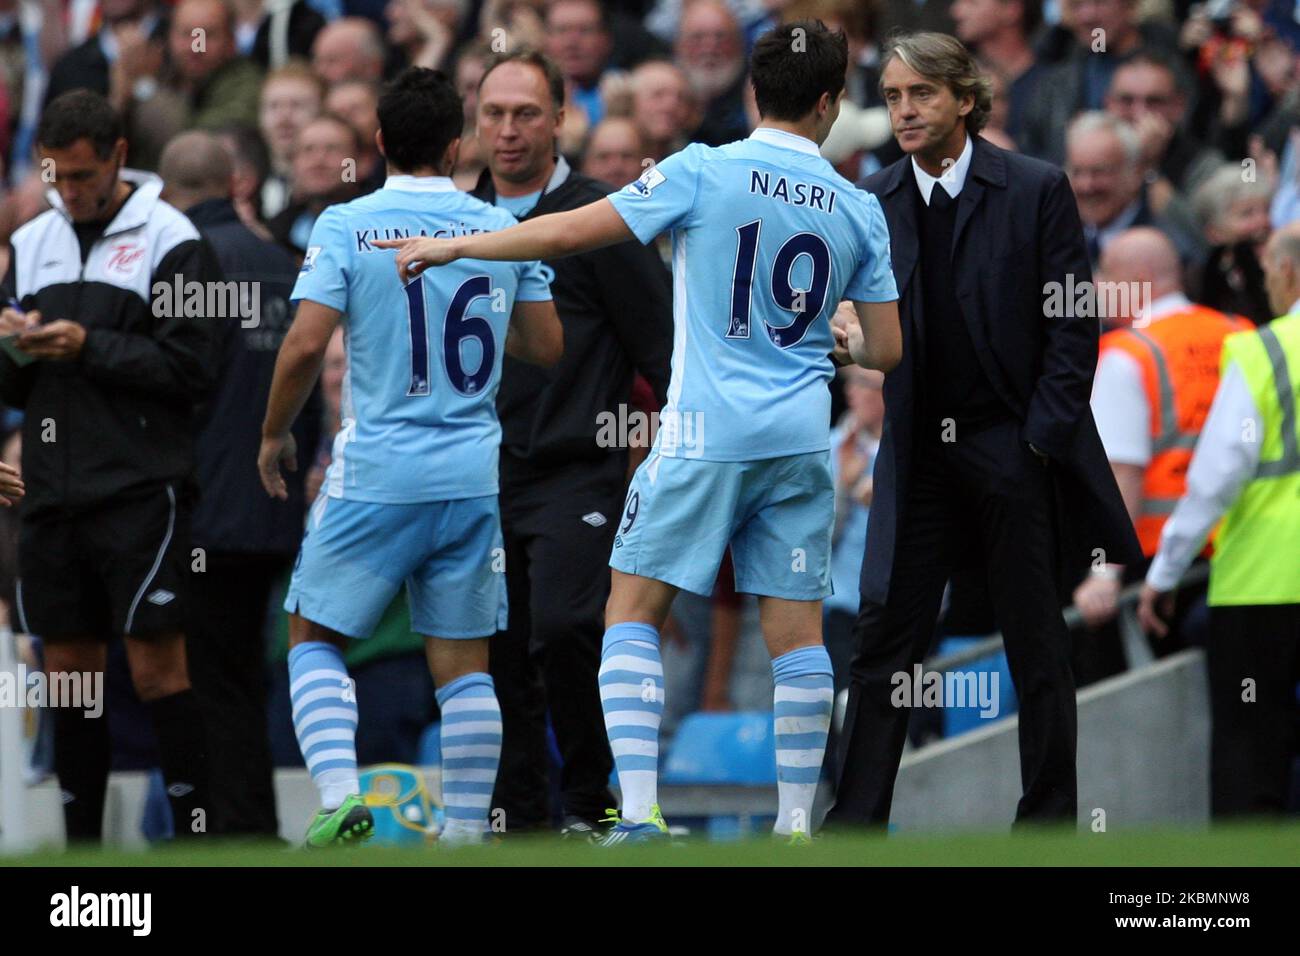 MANCHESTER, ENGLAND Manchester City manager Roberto Mancini gives instructions to Samir Nasri whilst David Platt converses with Sergio Aguero during the Premier League match between Manchester City and Everton at the Etihad Stadiun, Manchester on Saturday 24th September 2011. (Photo by Eddit Garvey/MI News/NurPhoto) Stock Photo